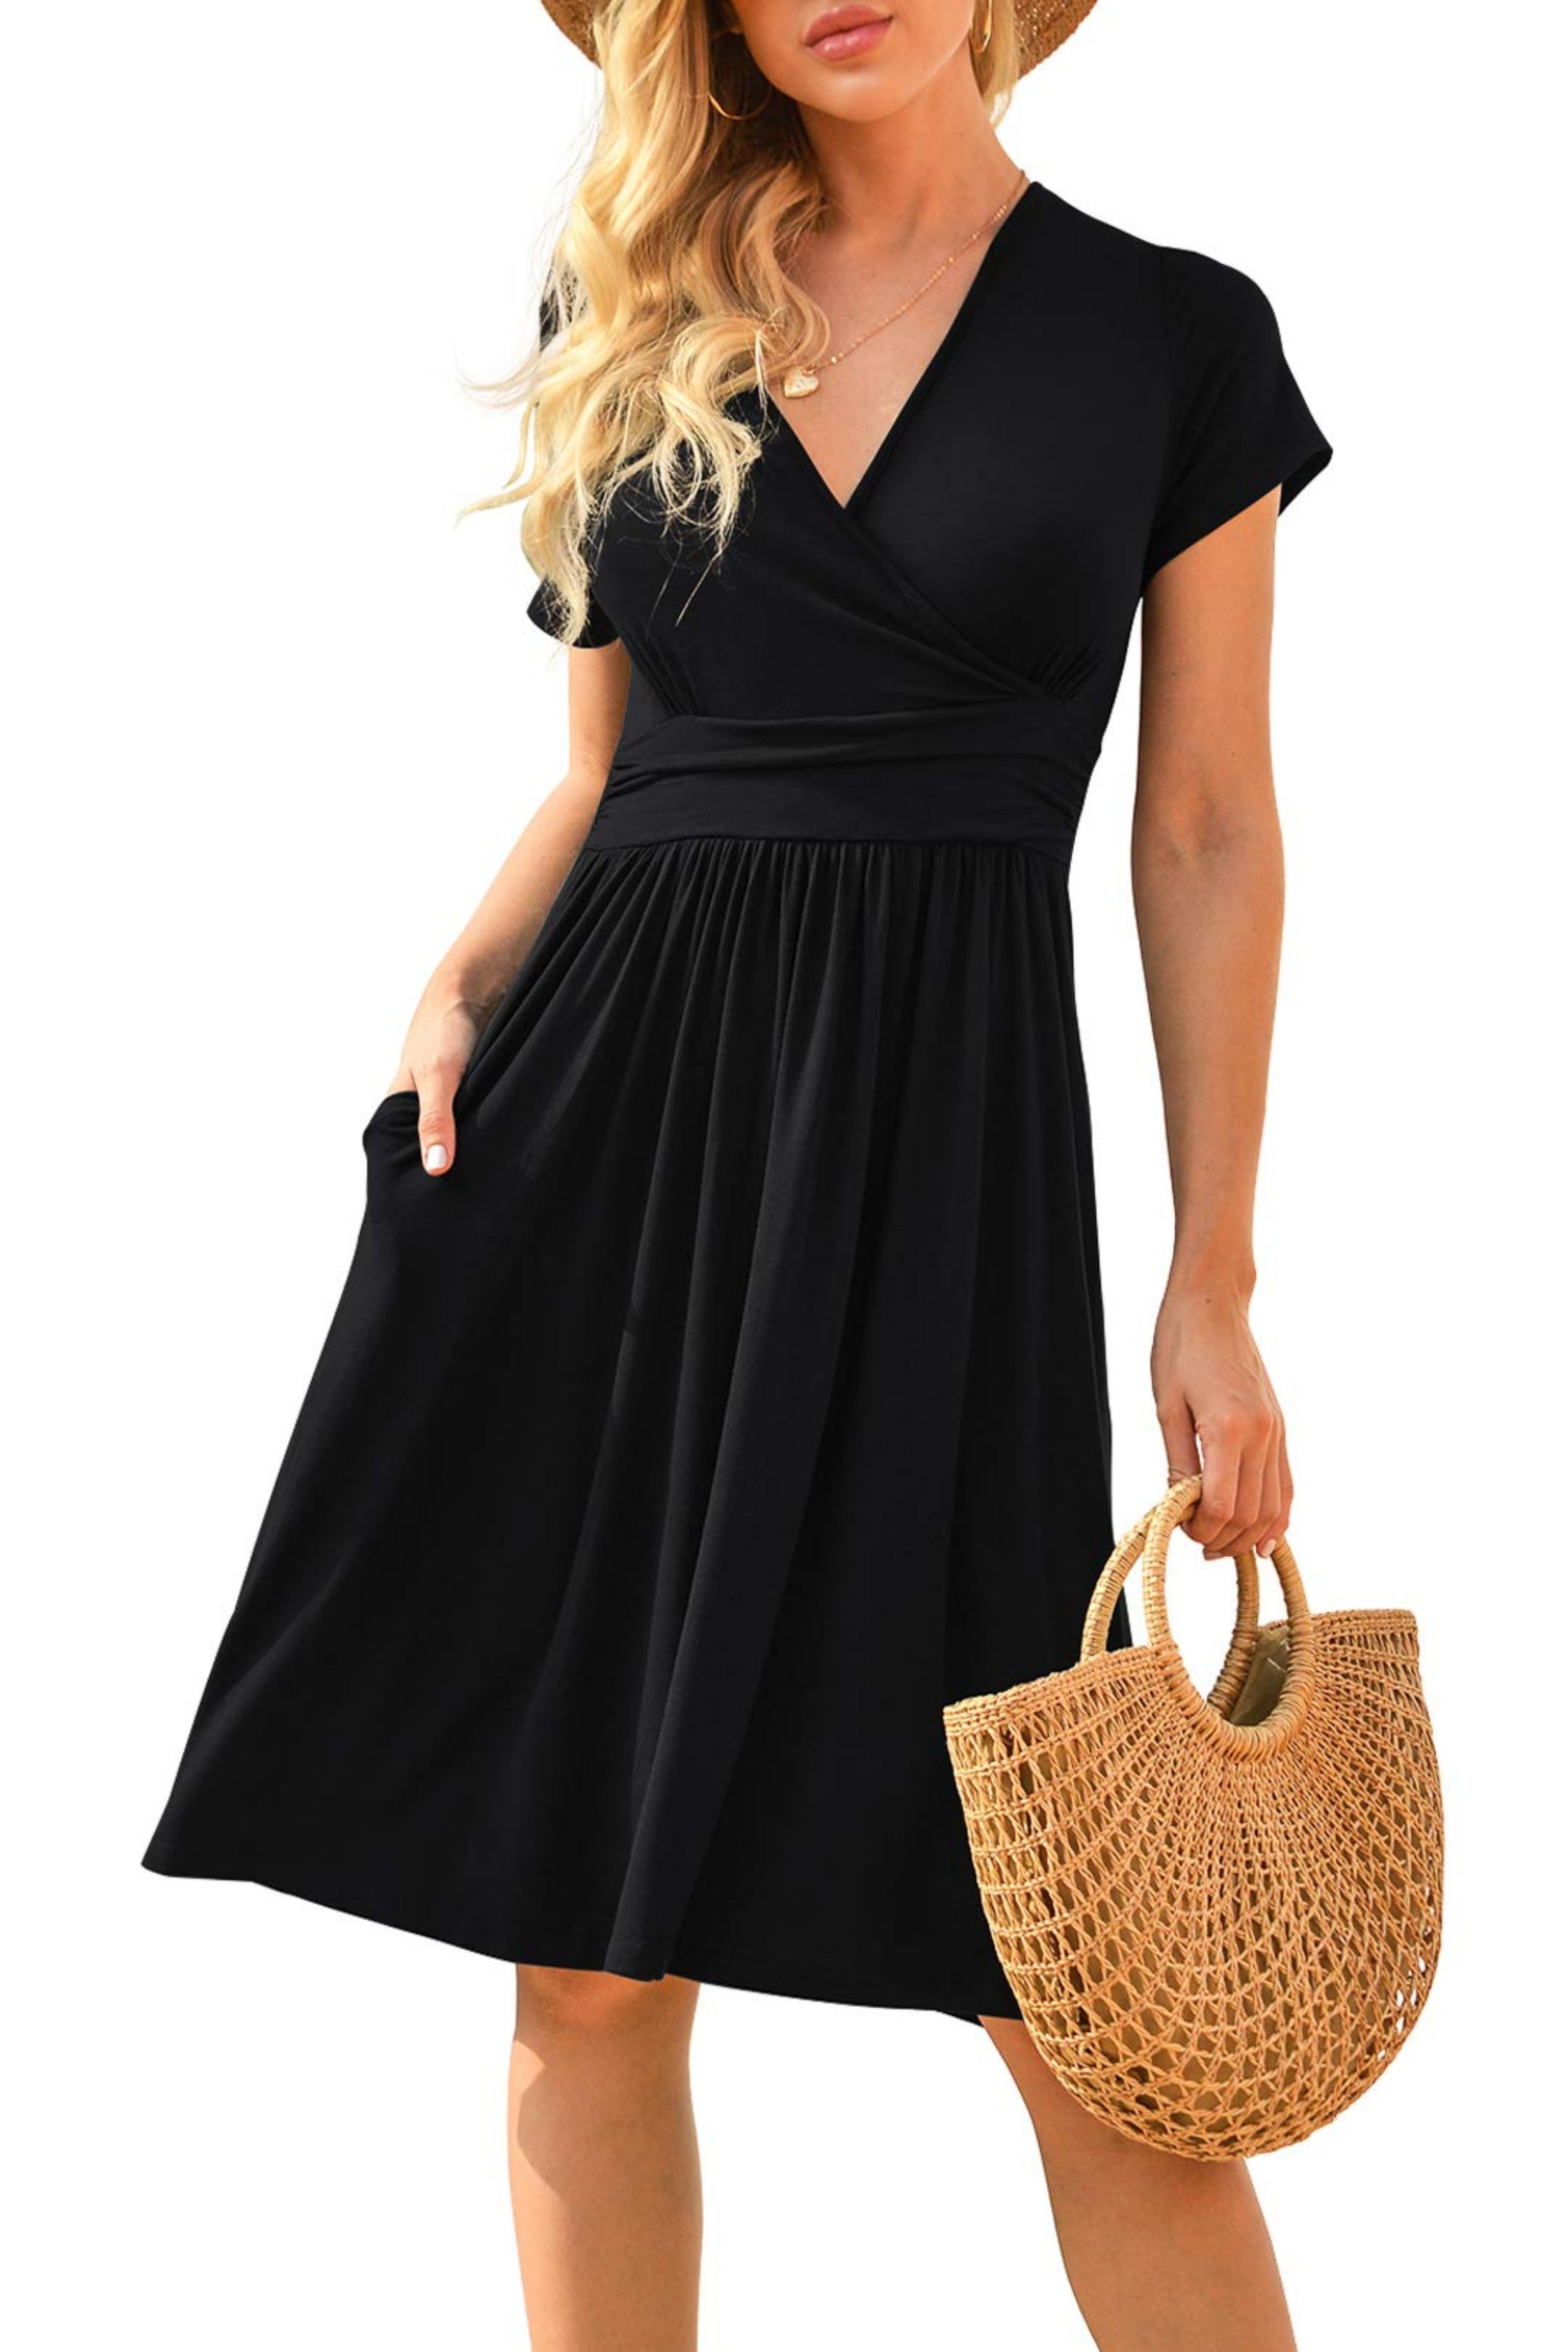 Summer Casual Midi Dress with Pockets, Short Party Dress